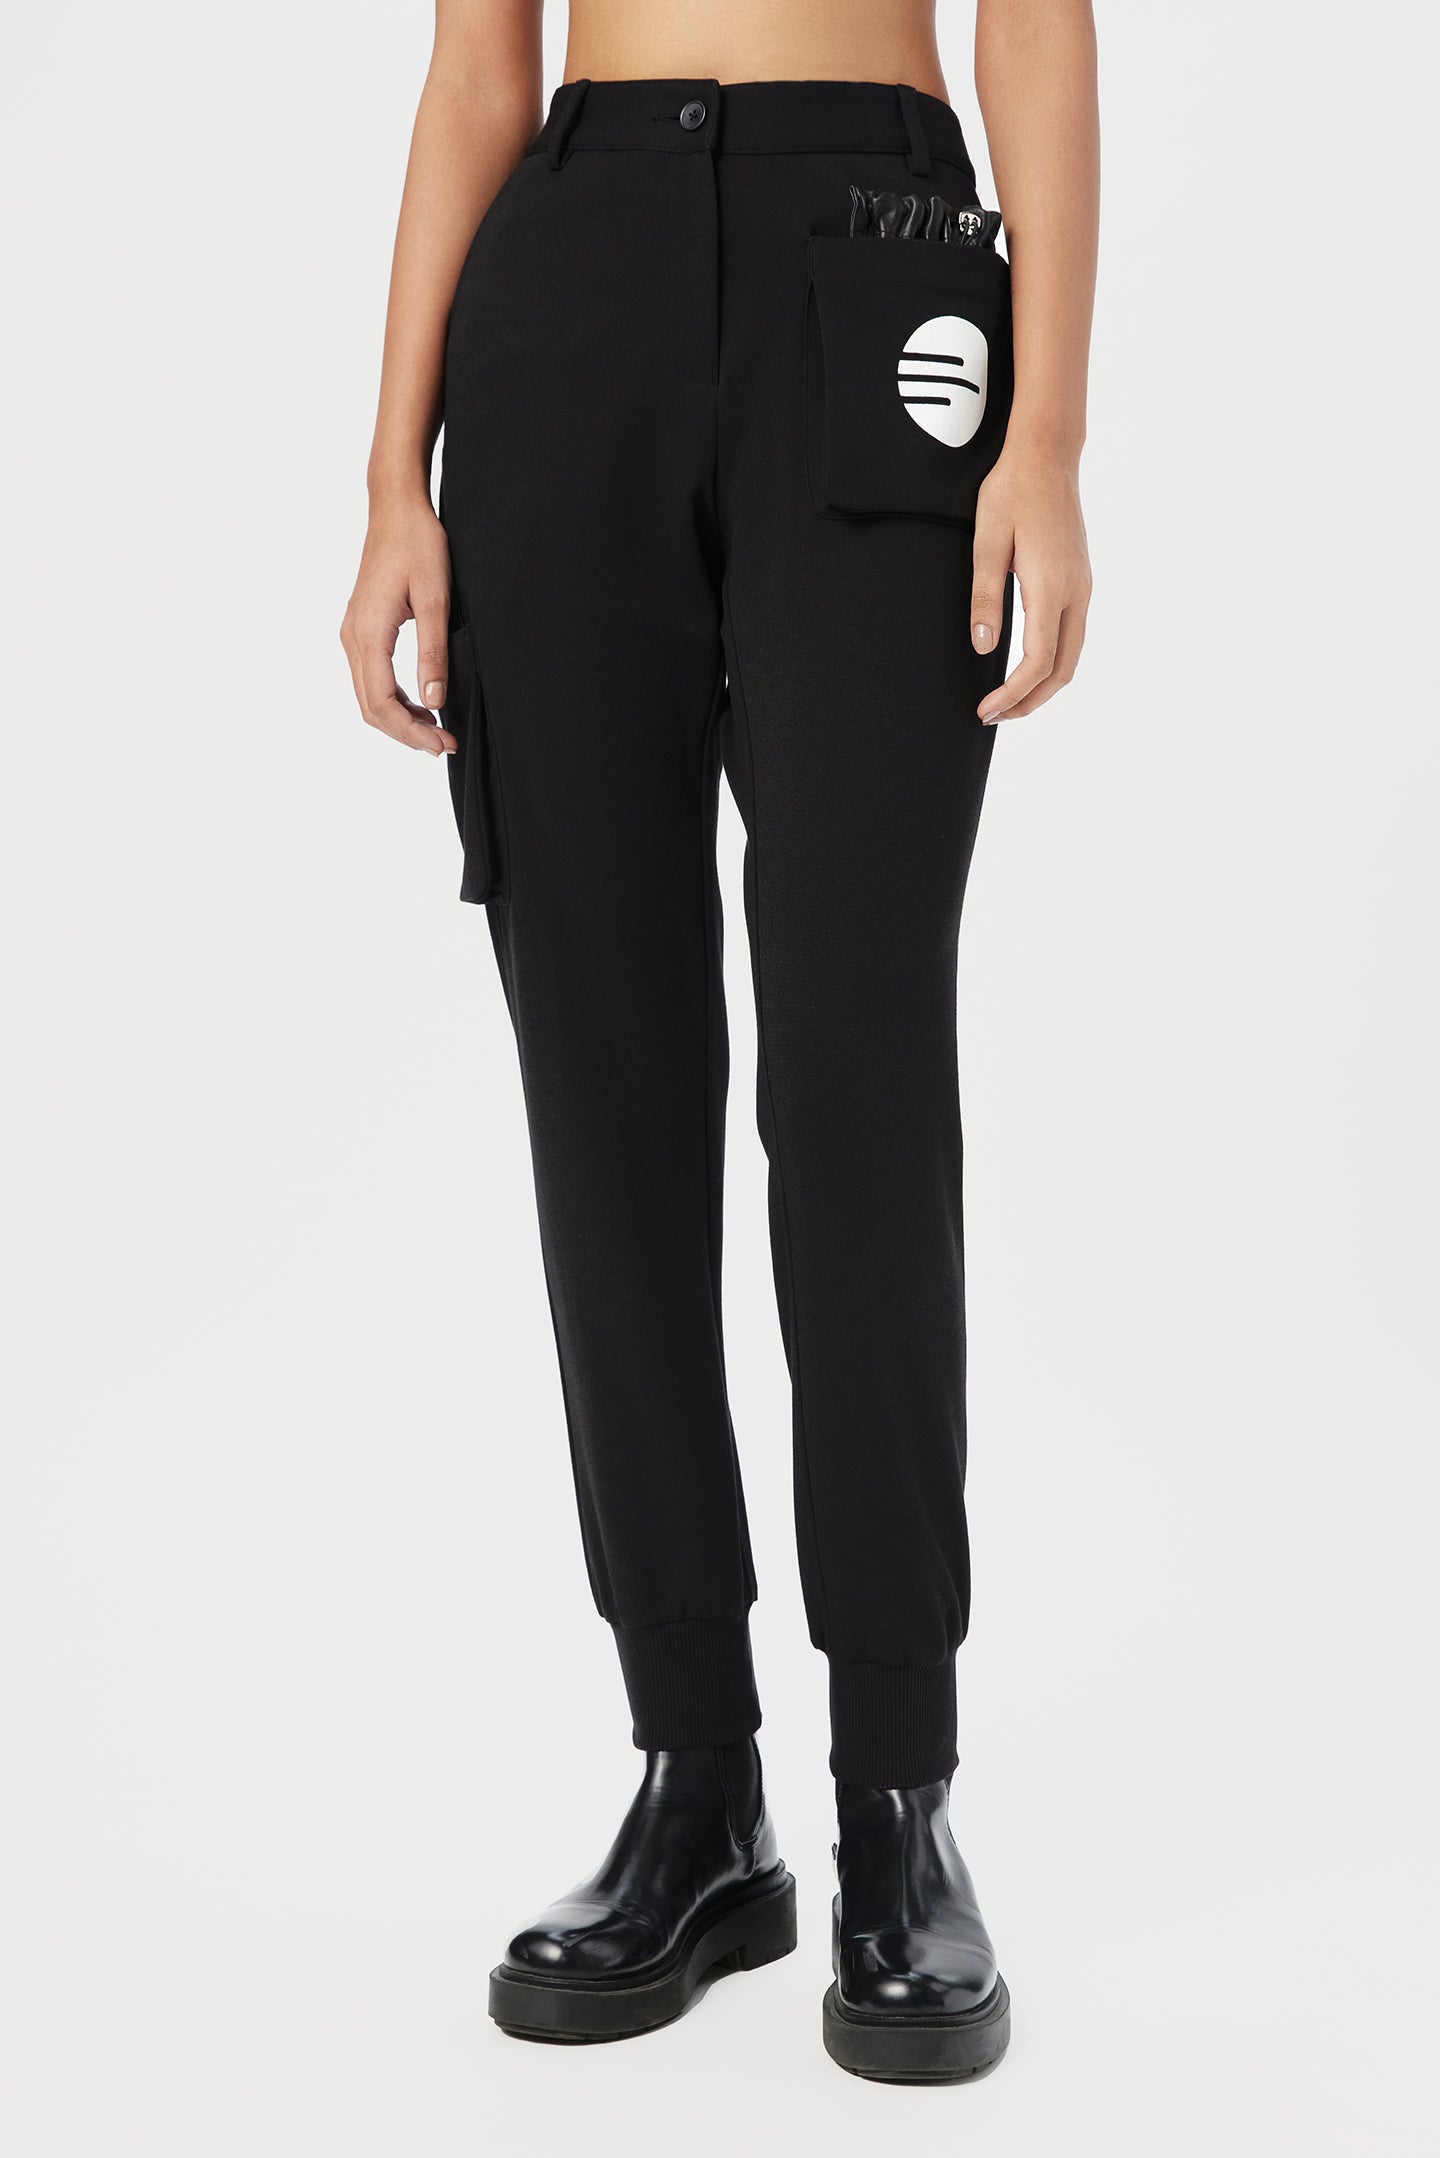 Regular Fit Joggers Featuring Logo Stamp Print